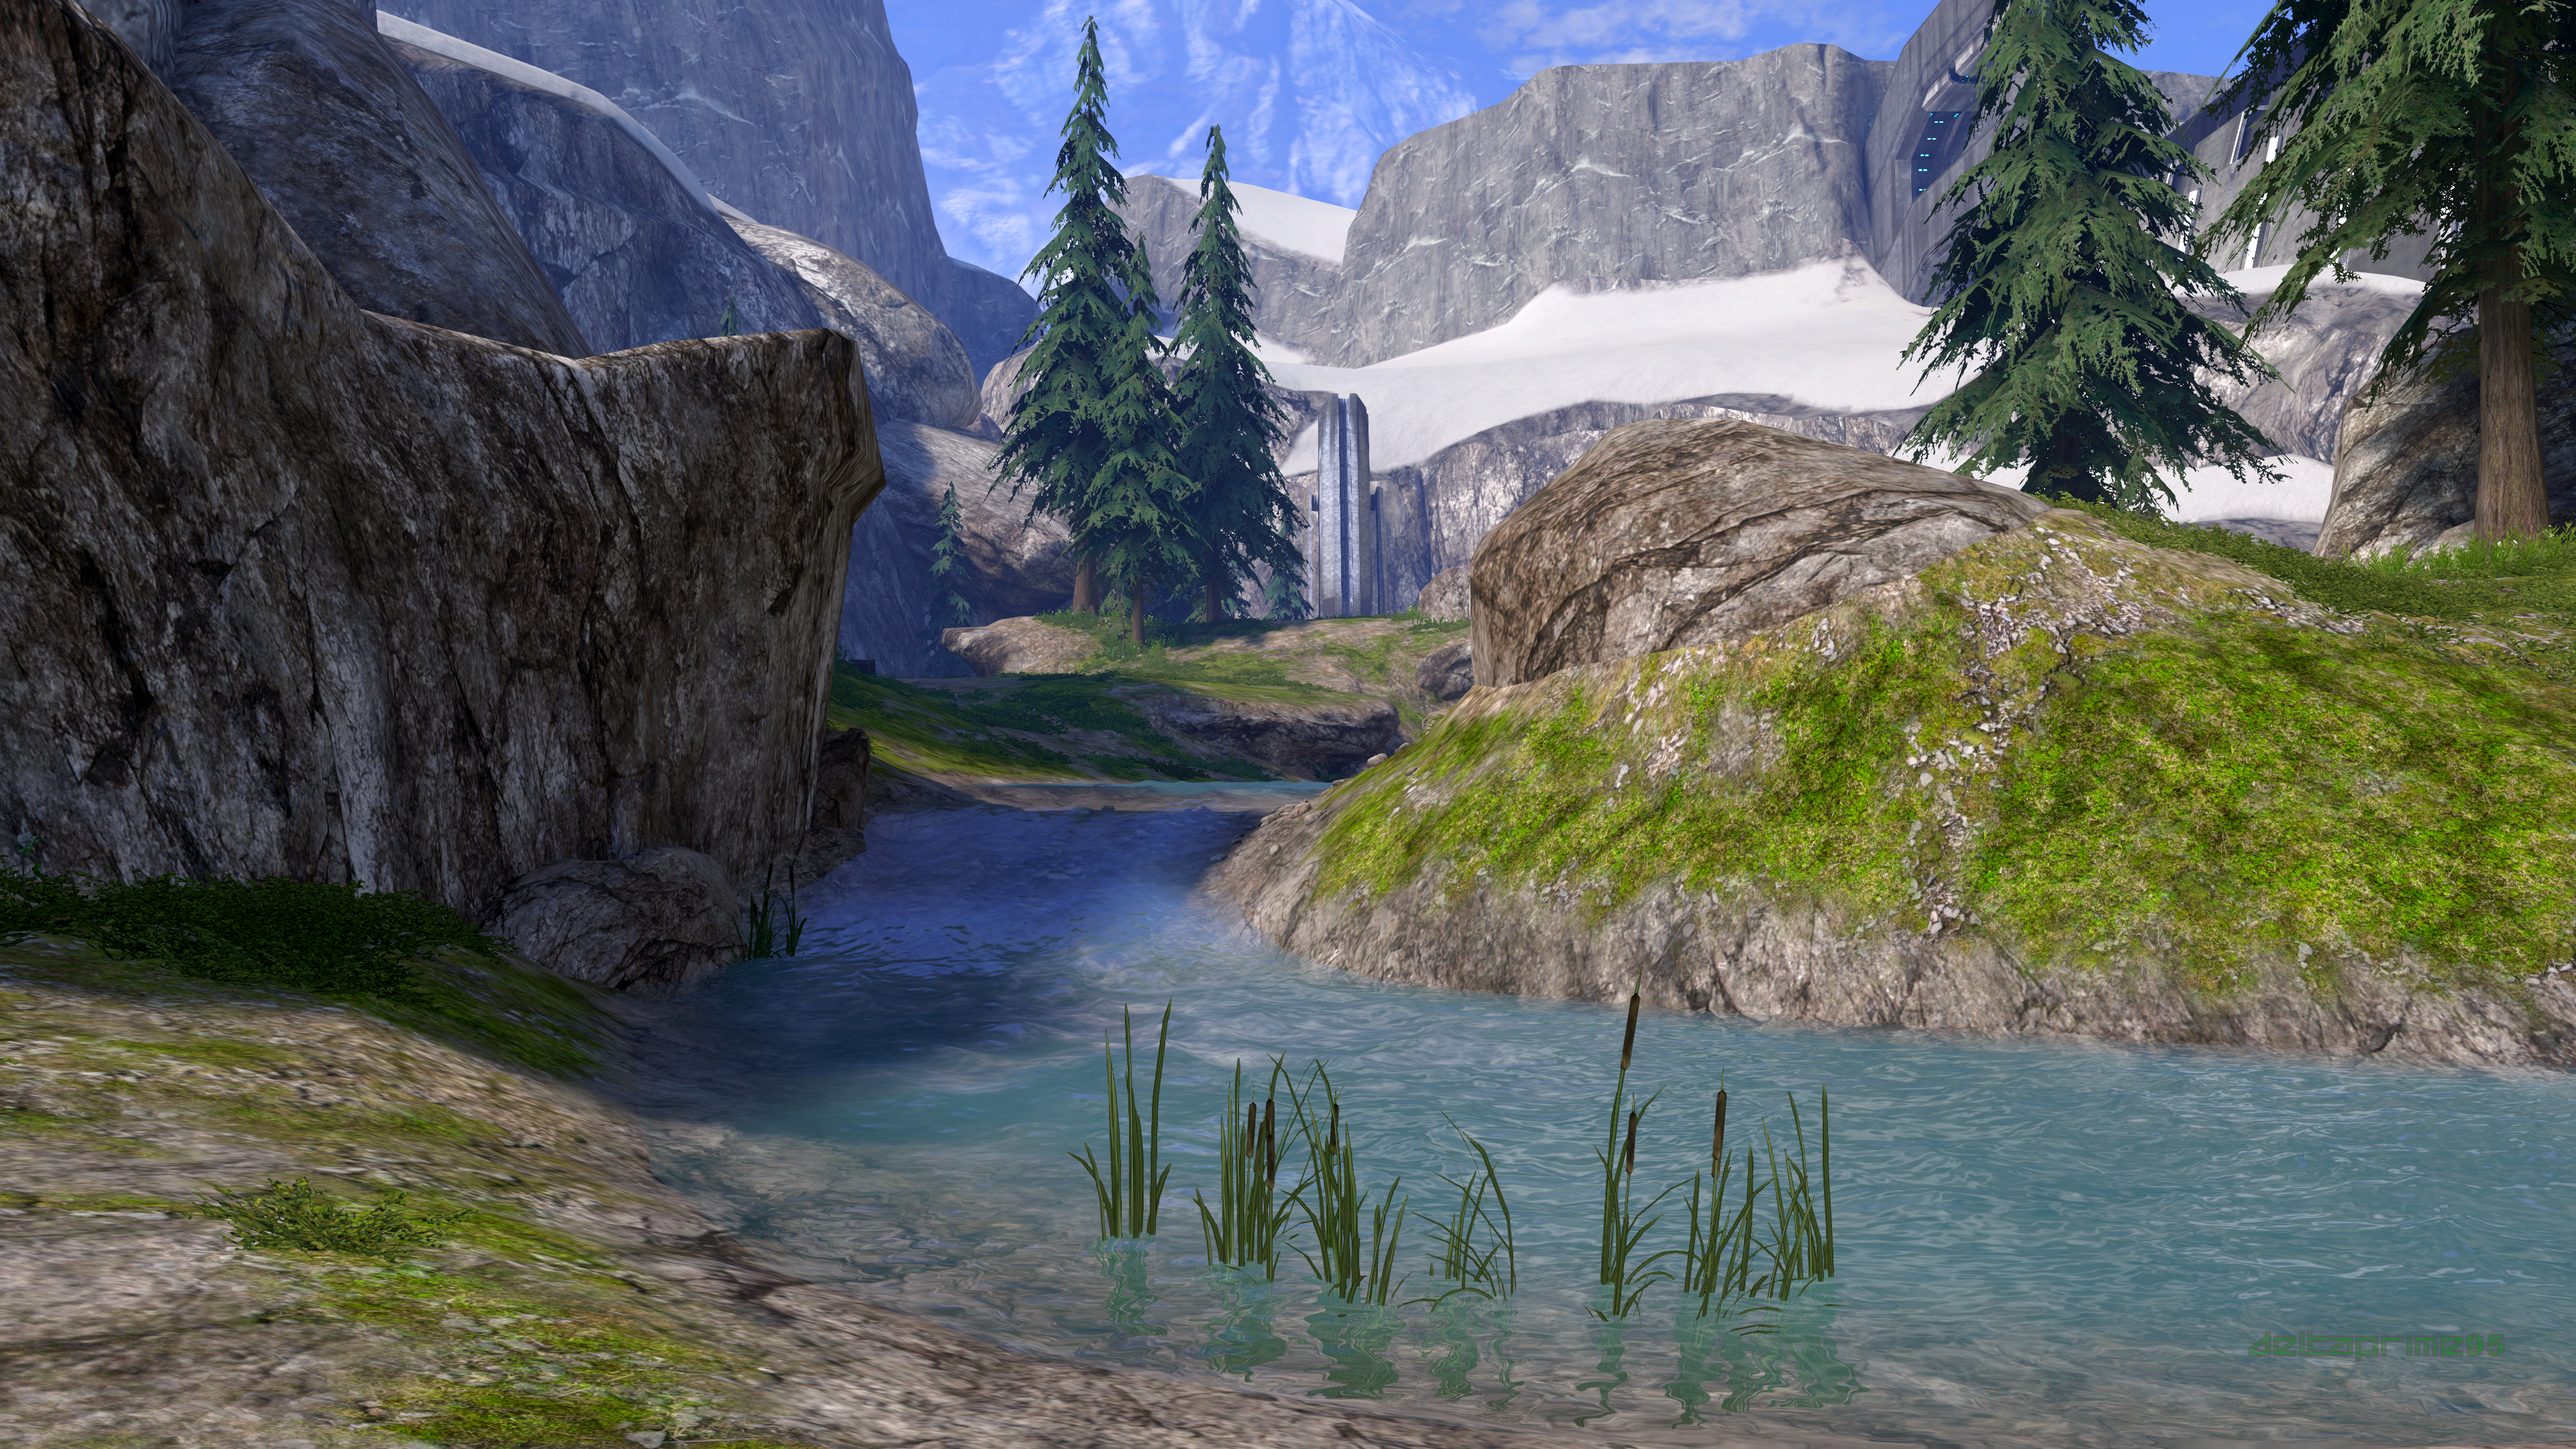 Halo 3 Science Fiction Futuristic Valhalla Multiplayer Map Mountains Stream In Game Screen Shot Vide 3840x2160